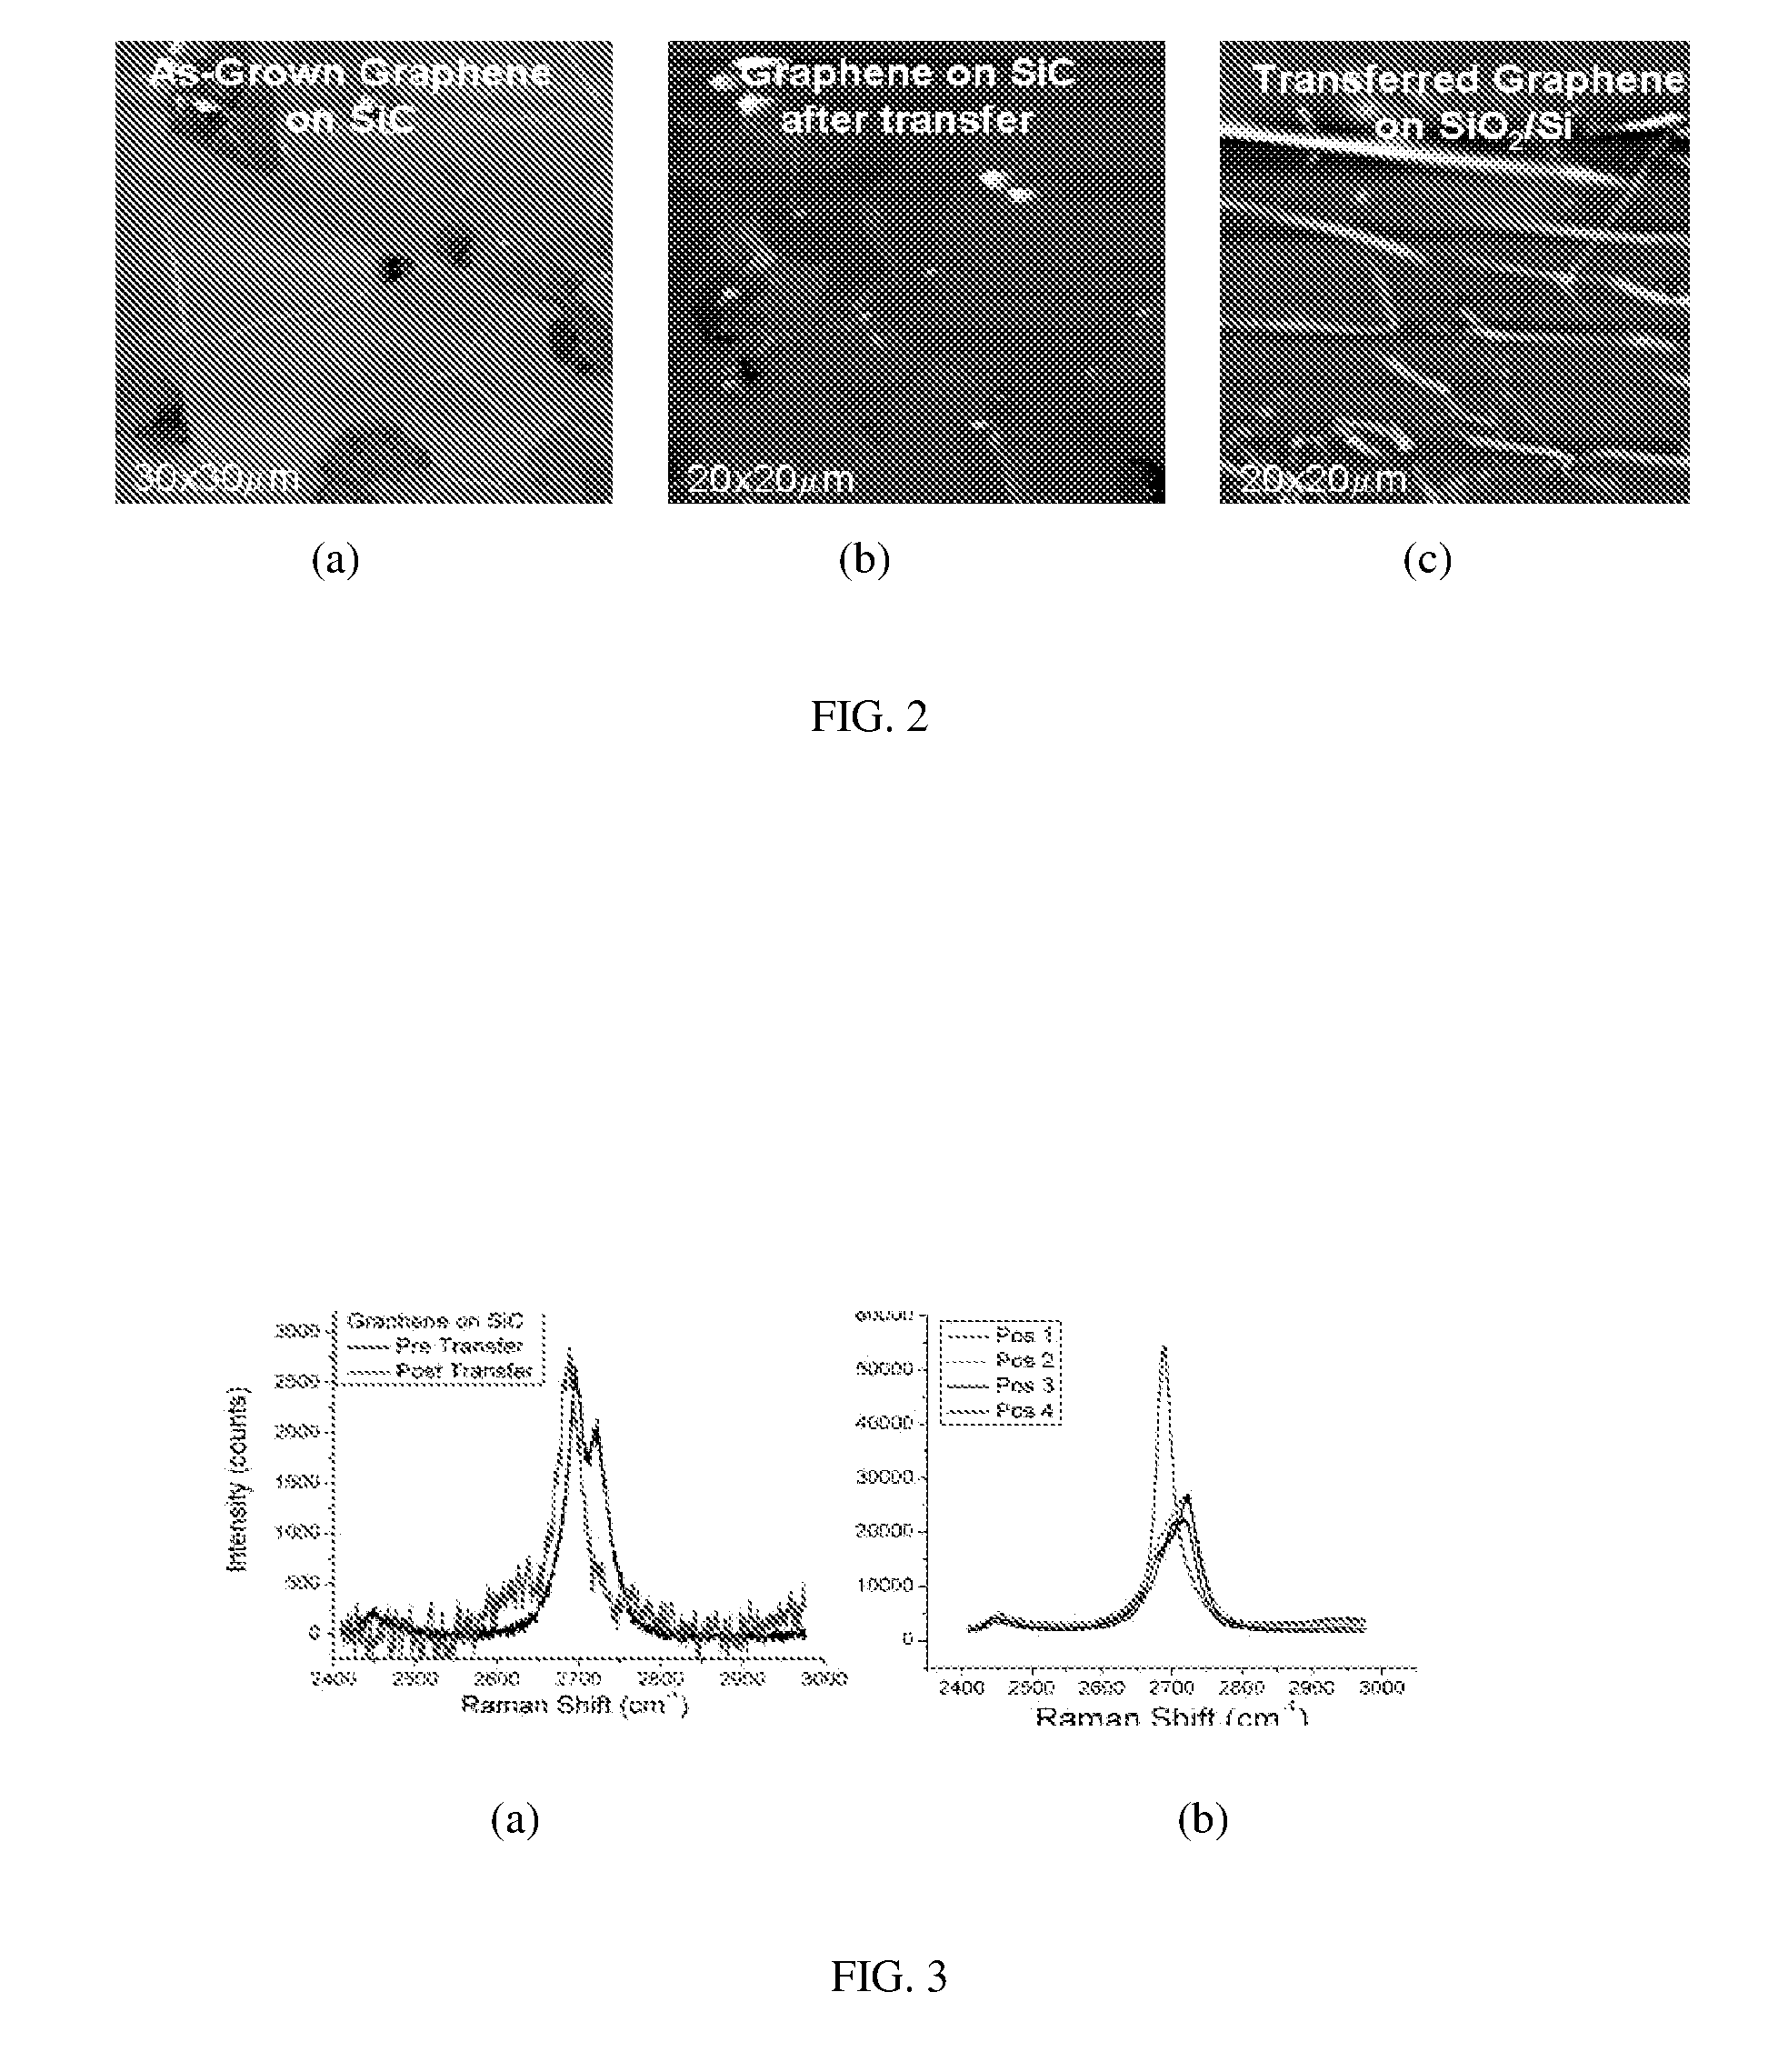 Method for the reduction of graphene film thickness and the removal and transfer of epitaxial graphene films from SiC substrates